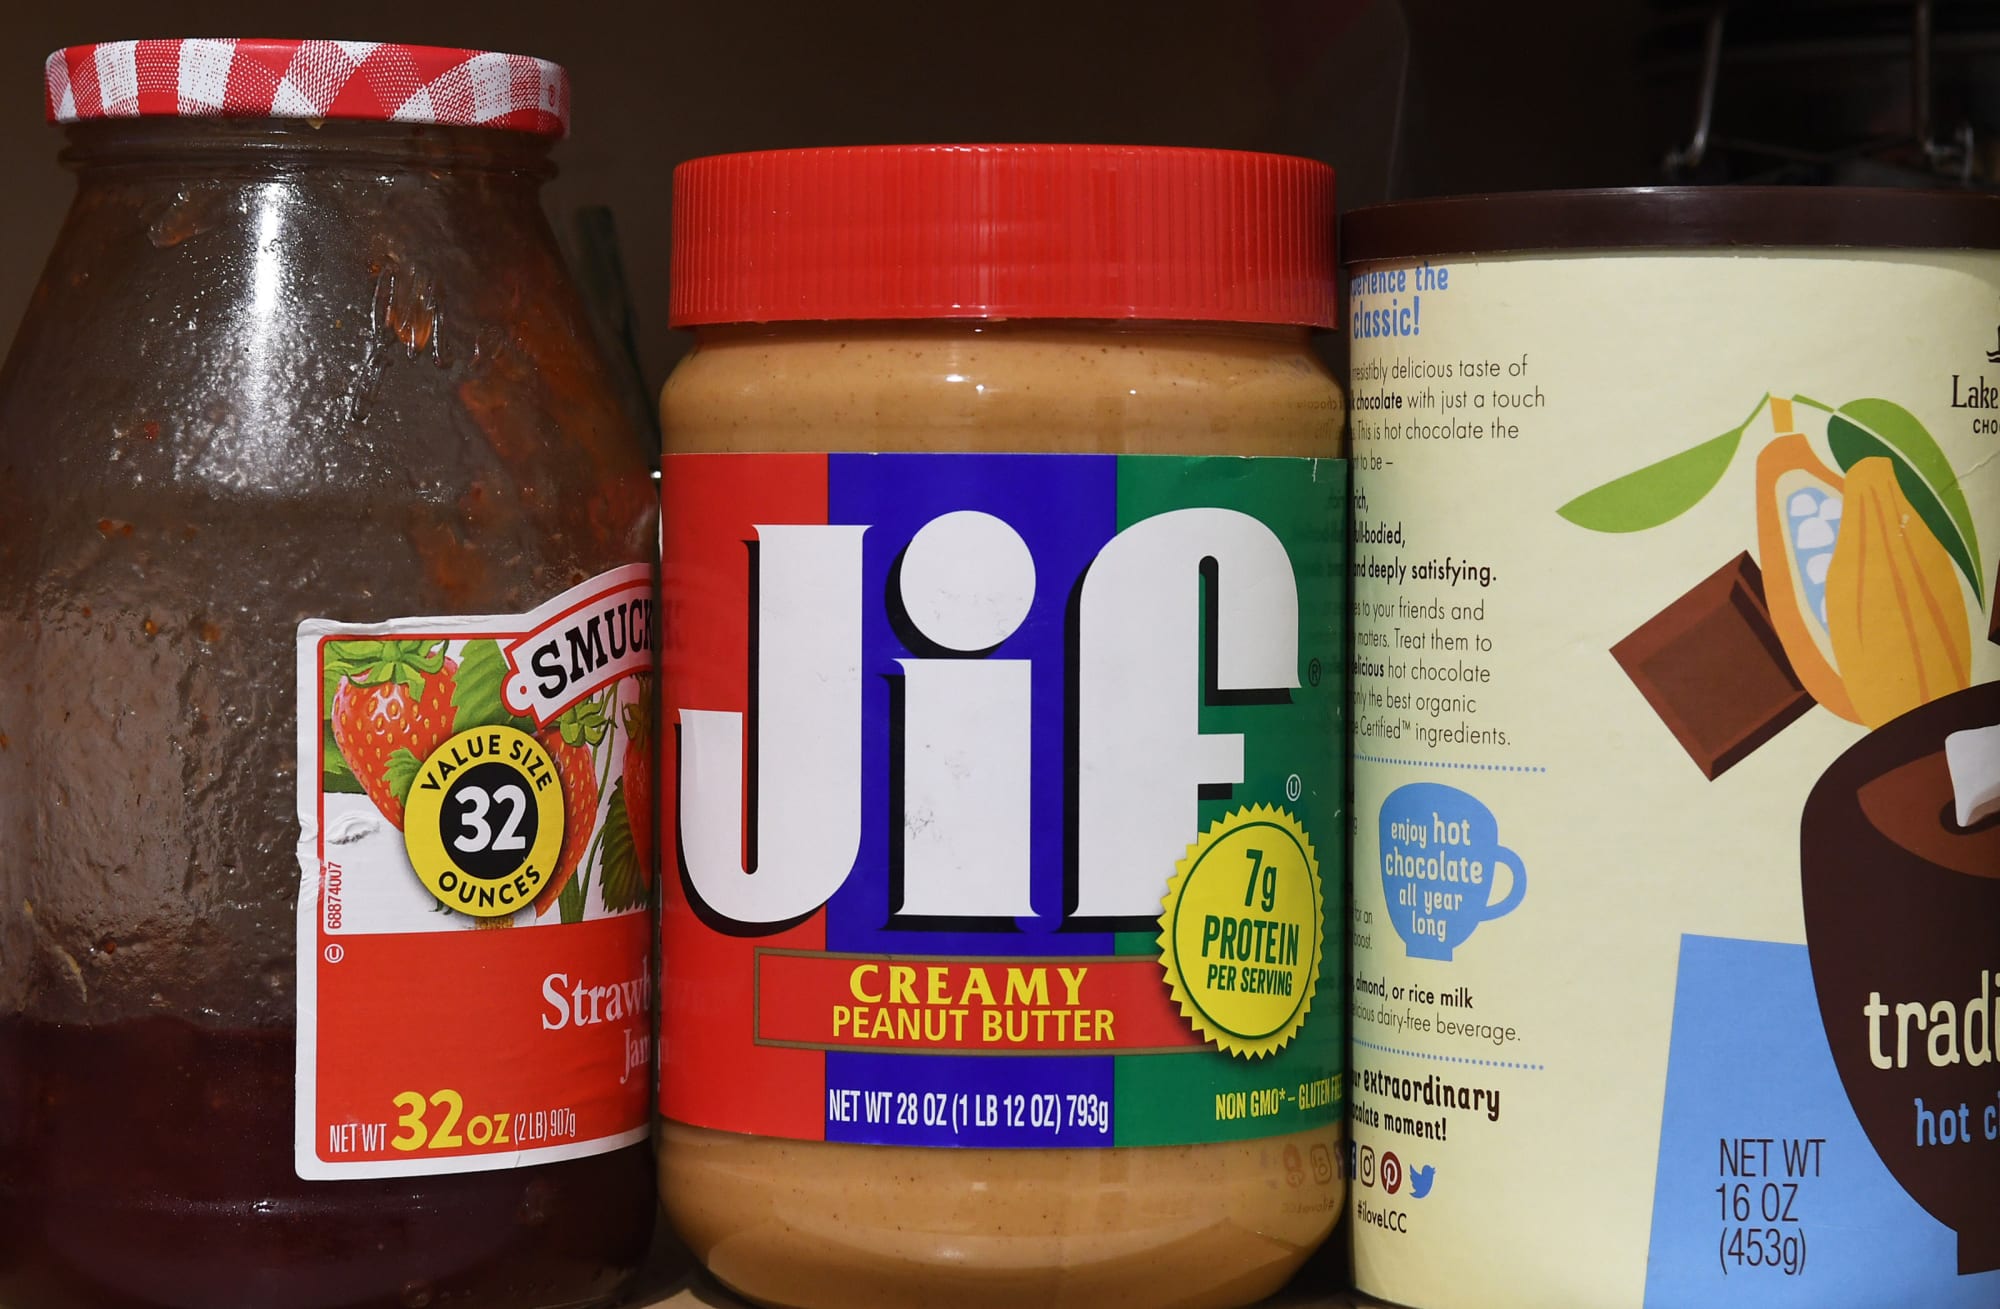 The Jif Peanut Butter Mandela Mystery - taking a look at the phenomenon